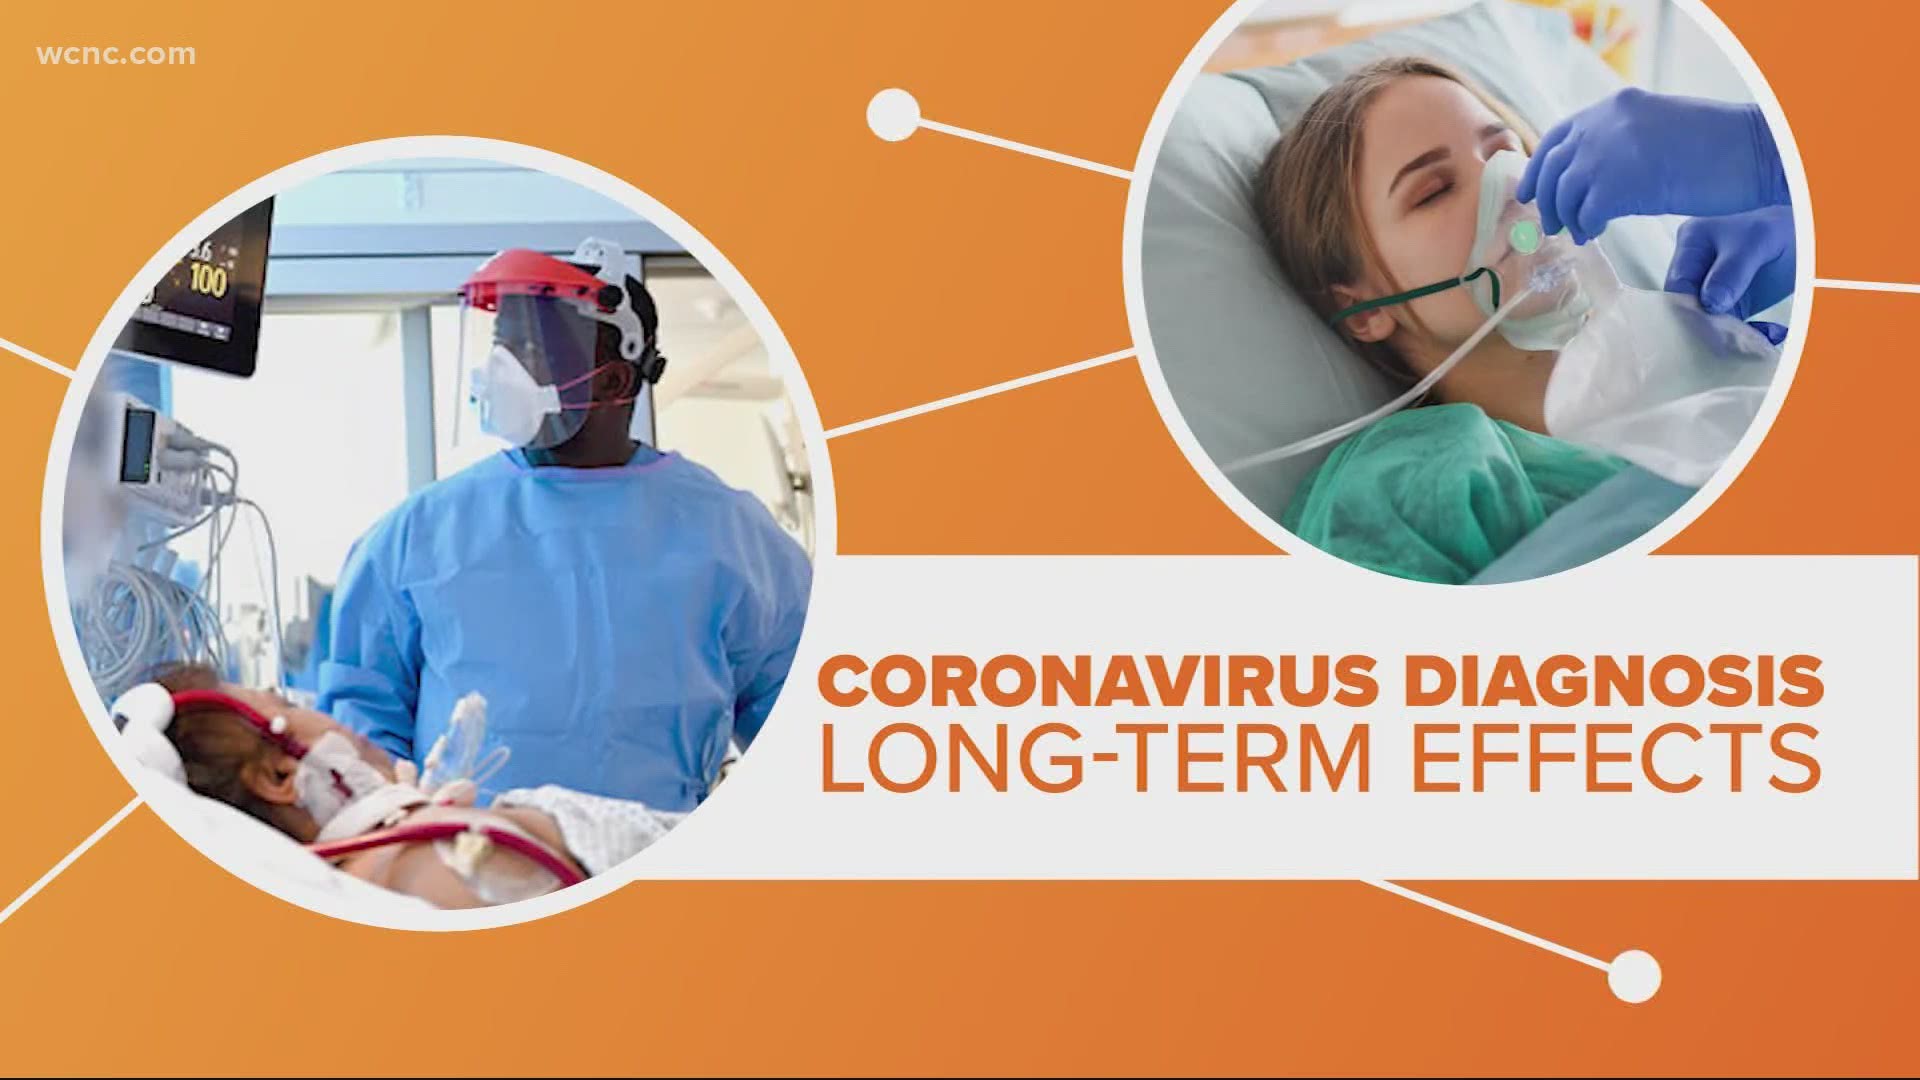 For months, doctors have talked about the common symptoms of COVID-19. And while some of them are scarier, the possible long-term effects could be even worse.